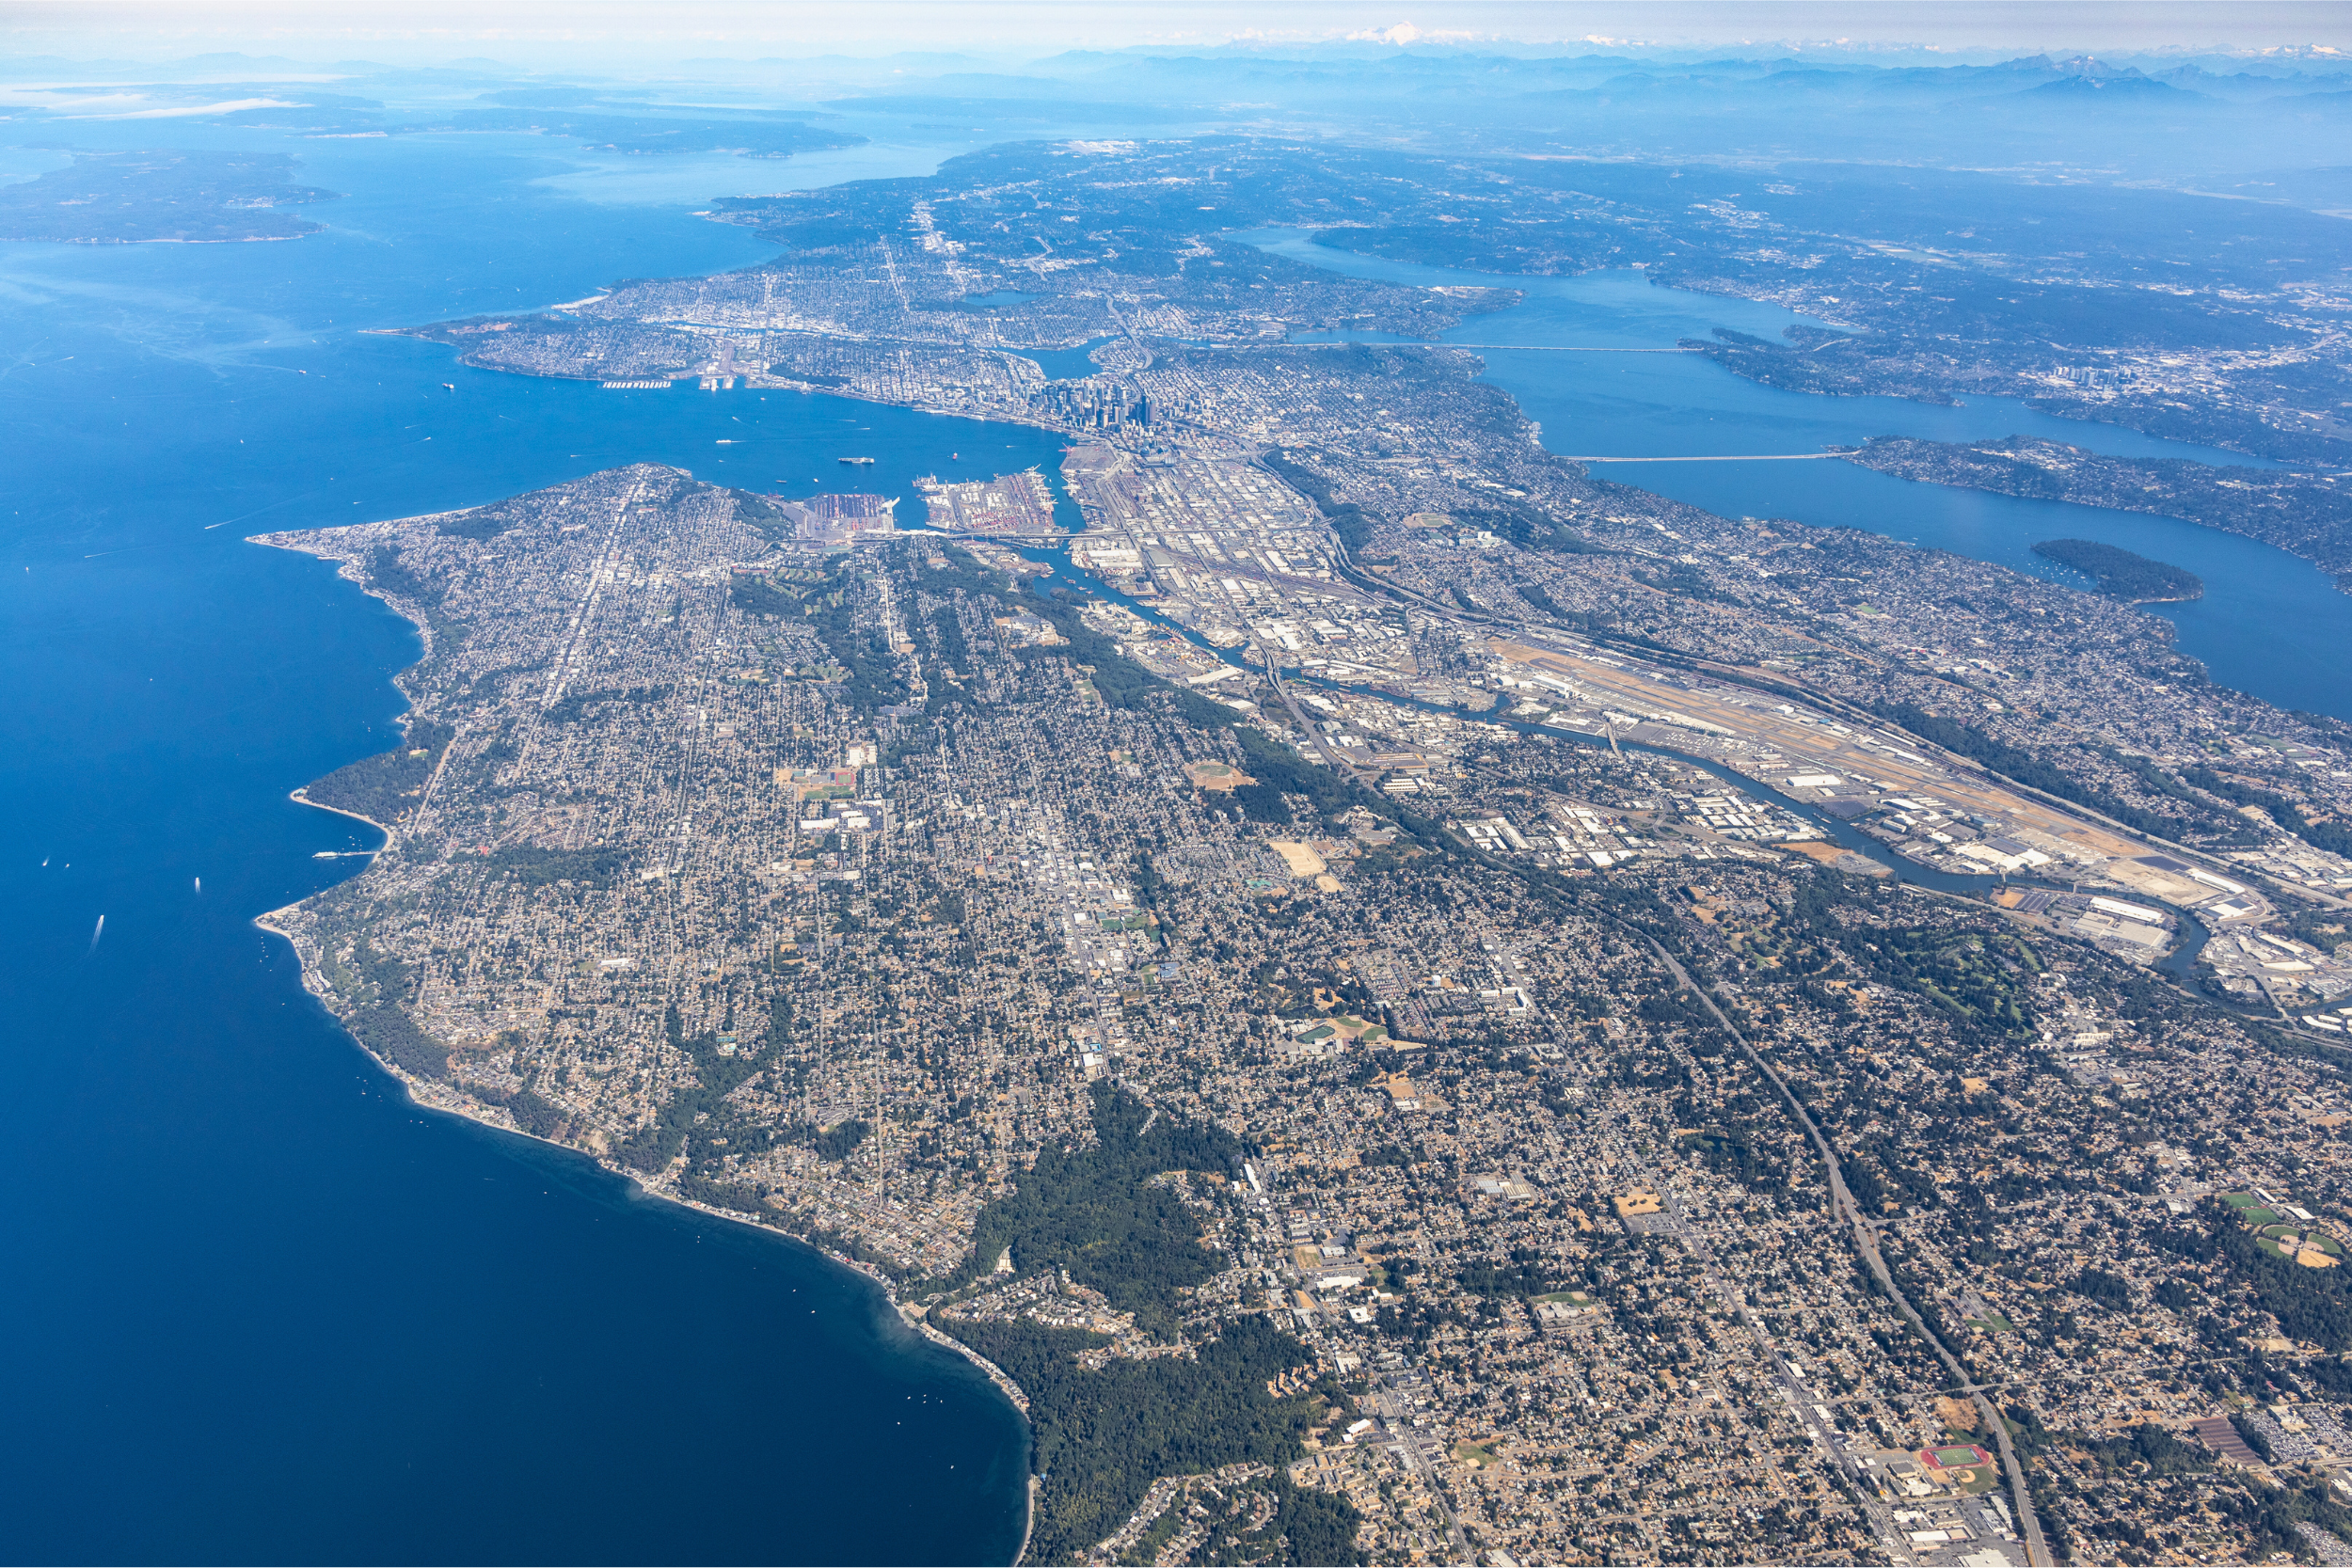 Aerial shot overlooking north over Seattle, including Elliott Bay, the Salish Sea/Puget Sound, Lake Washington, Mercer Island, and parts of the East Side of King County and the Cascade Mountain Range